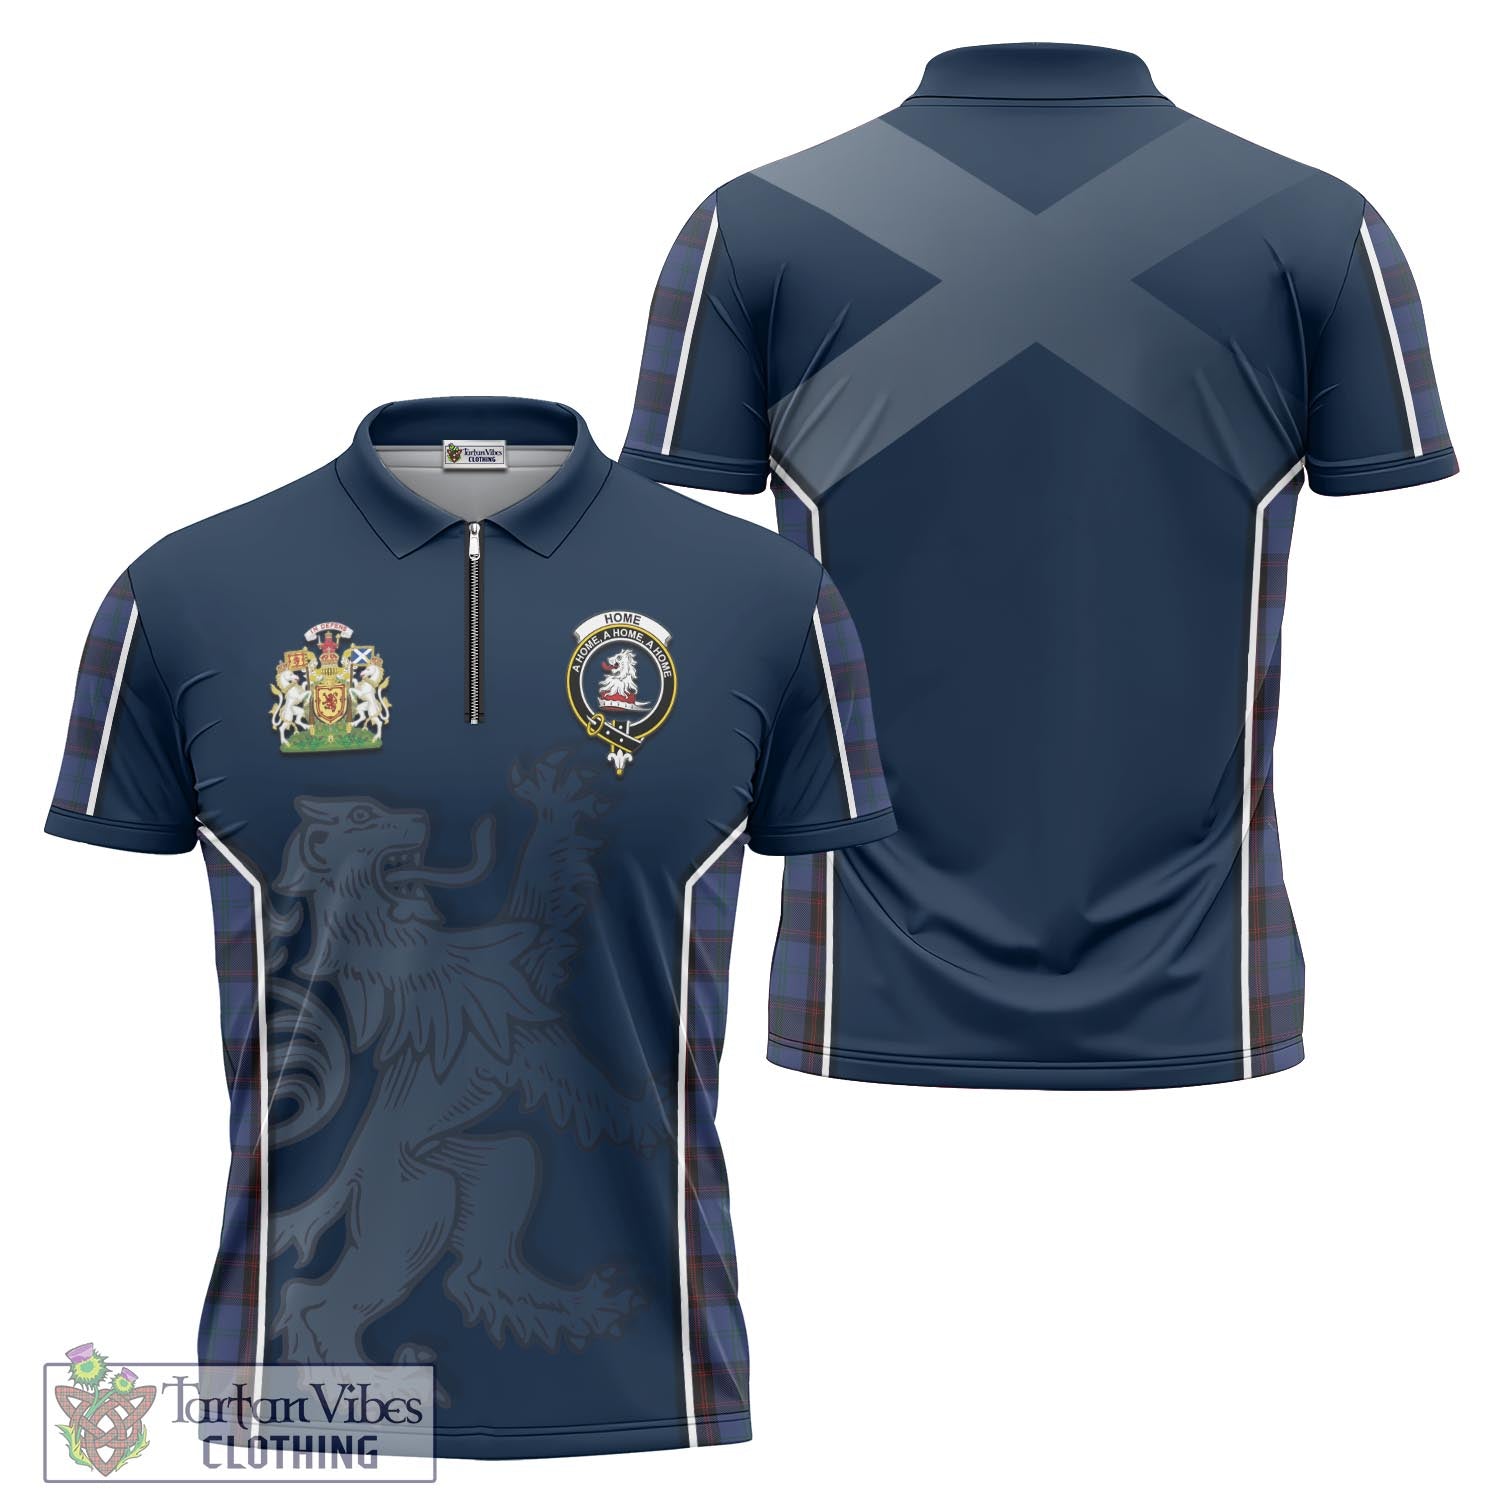 Tartan Vibes Clothing Home (Hume) Tartan Zipper Polo Shirt with Family Crest and Lion Rampant Vibes Sport Style